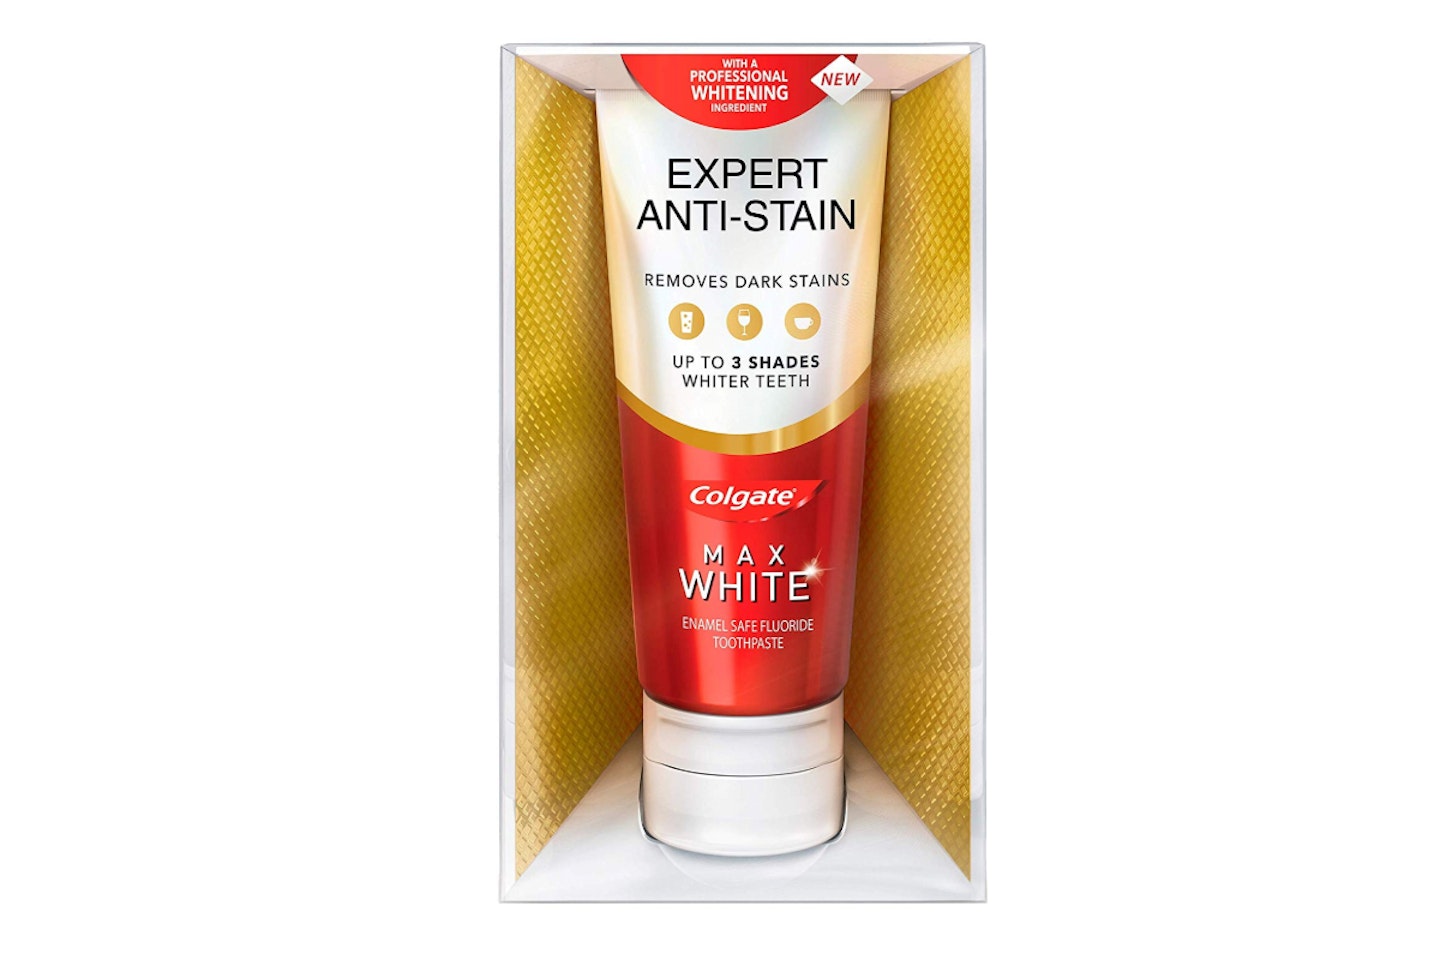 Colgate Max White Expert Complete Anti-Stain Whitening Toothpaste